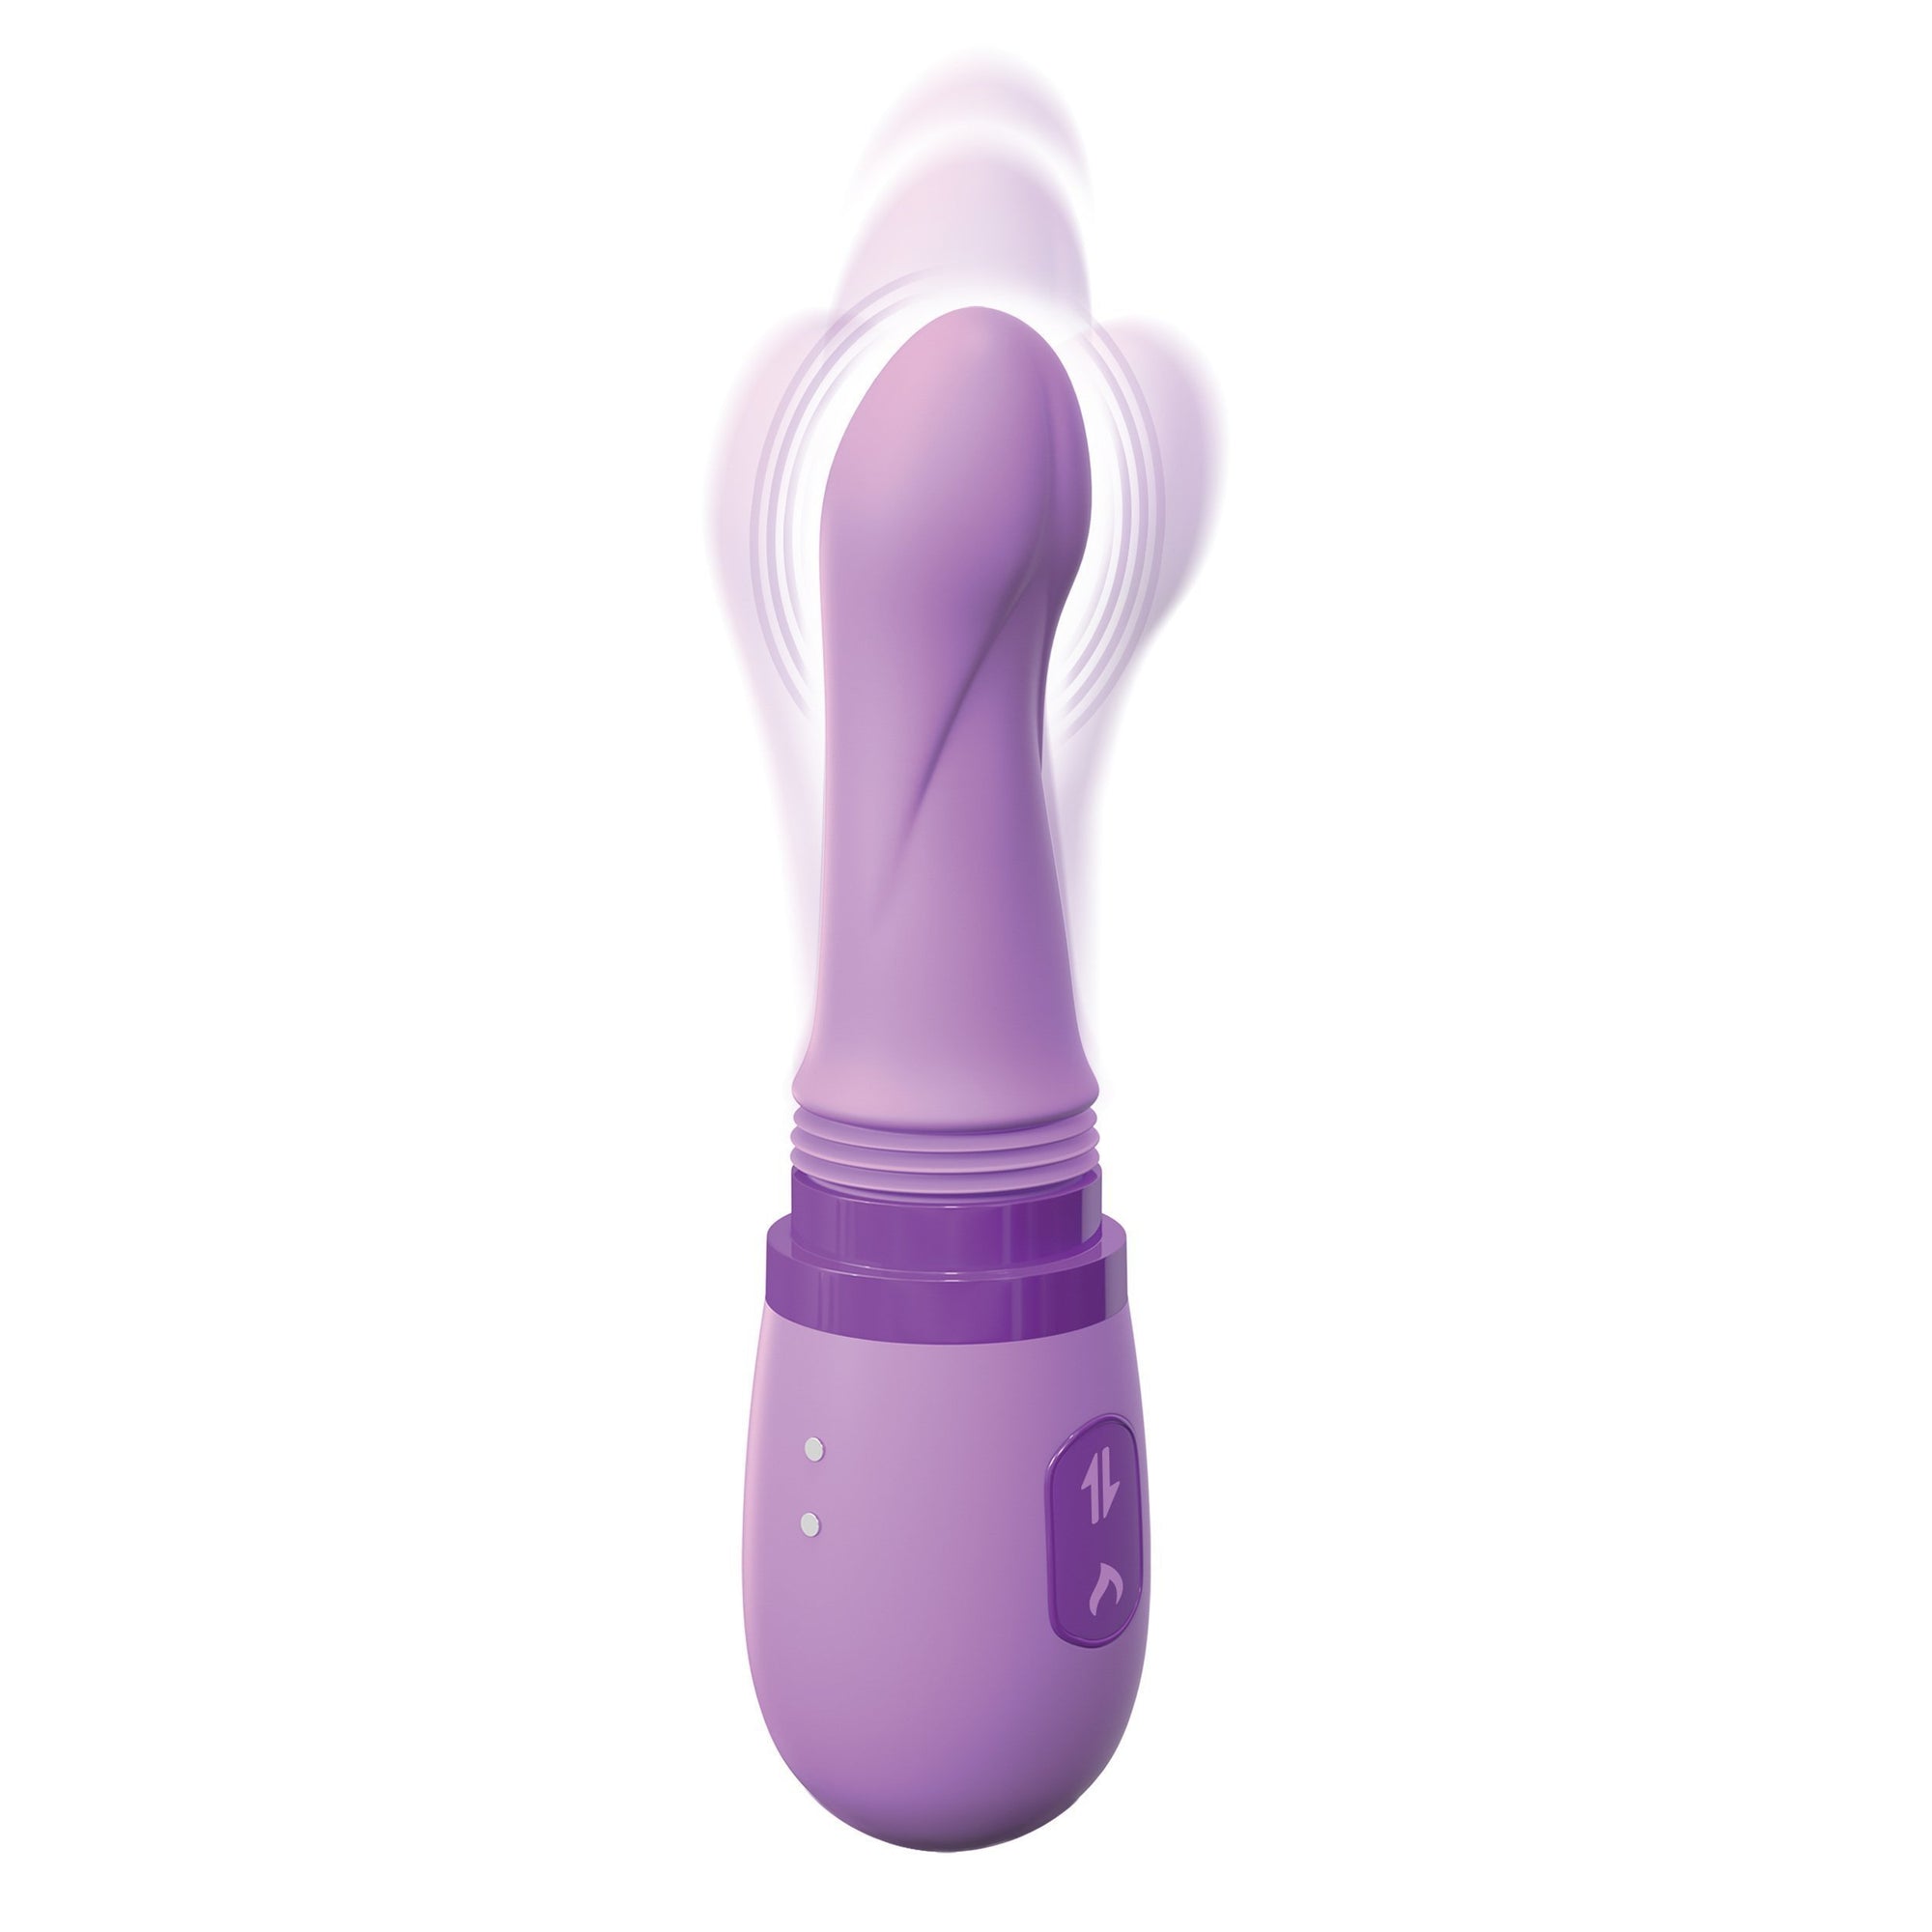 Pipedream - Fantasy For Her Her Personal Sex Machine Vibrator (Purple) G Spot Dildo (Vibration) Rechargeable